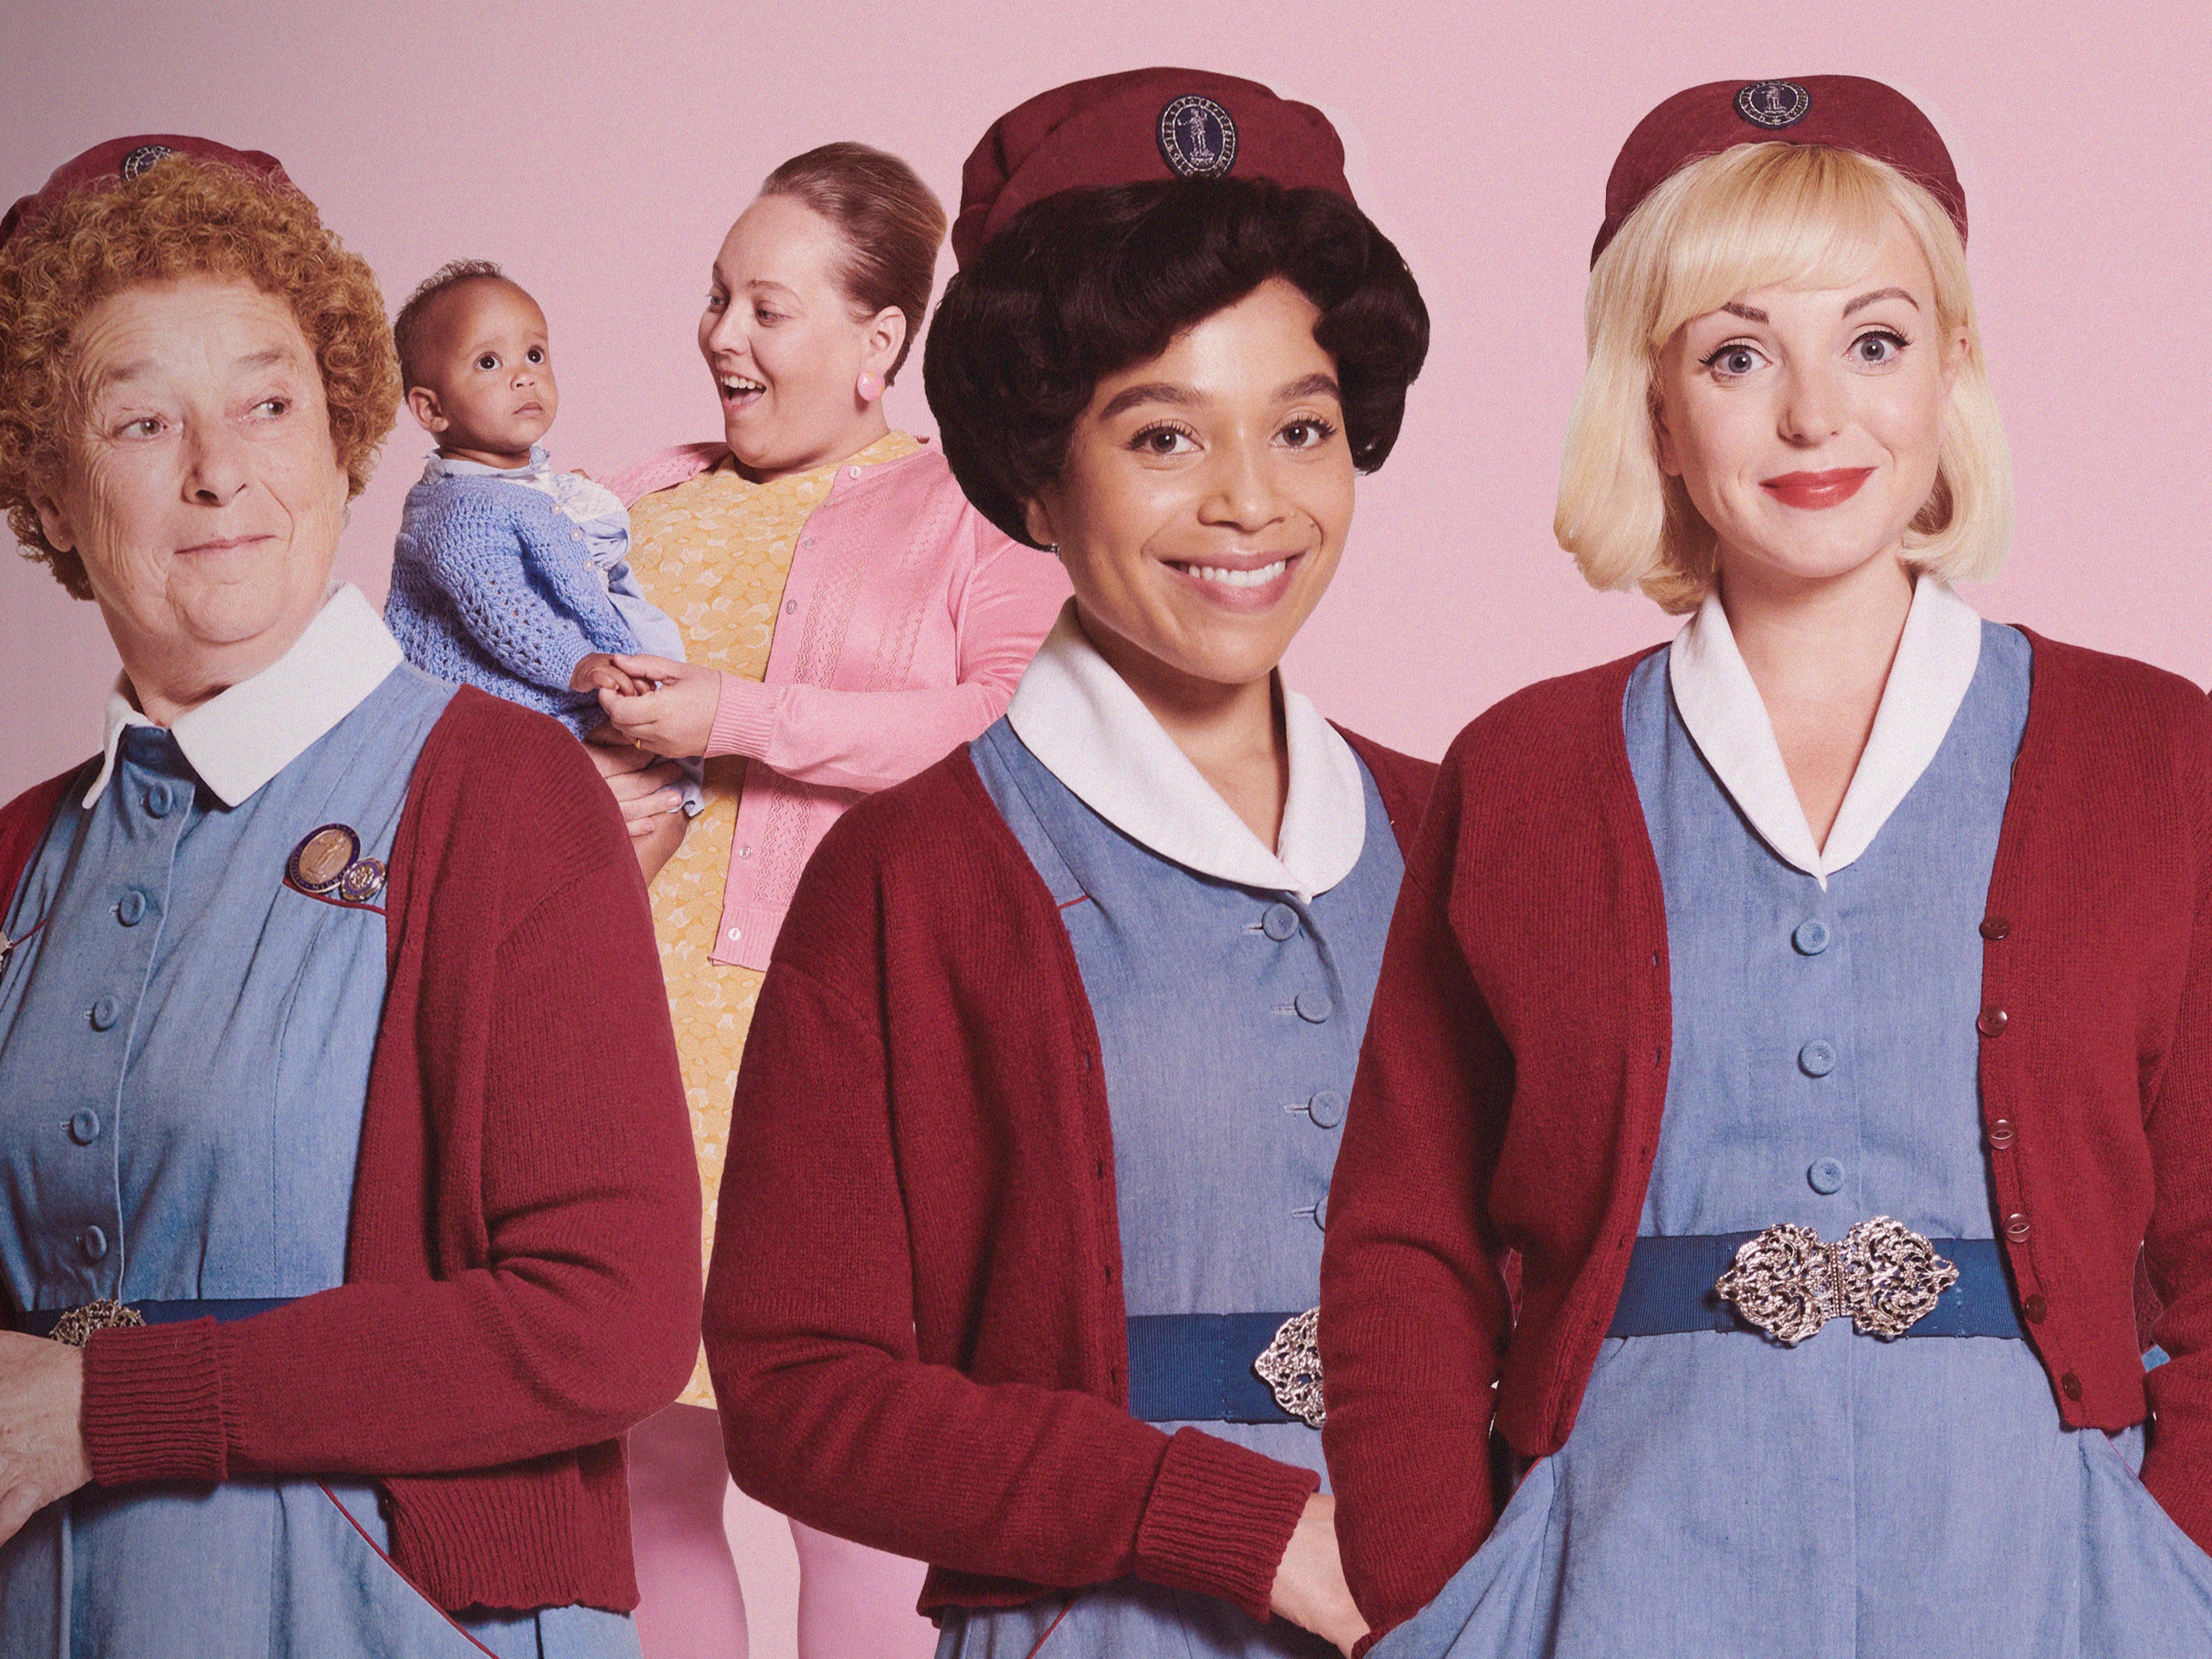 If a kid watches Call the Midwife or Hugh Laurie as House and wants to become a midwife or doctor, why shouldn’t they?